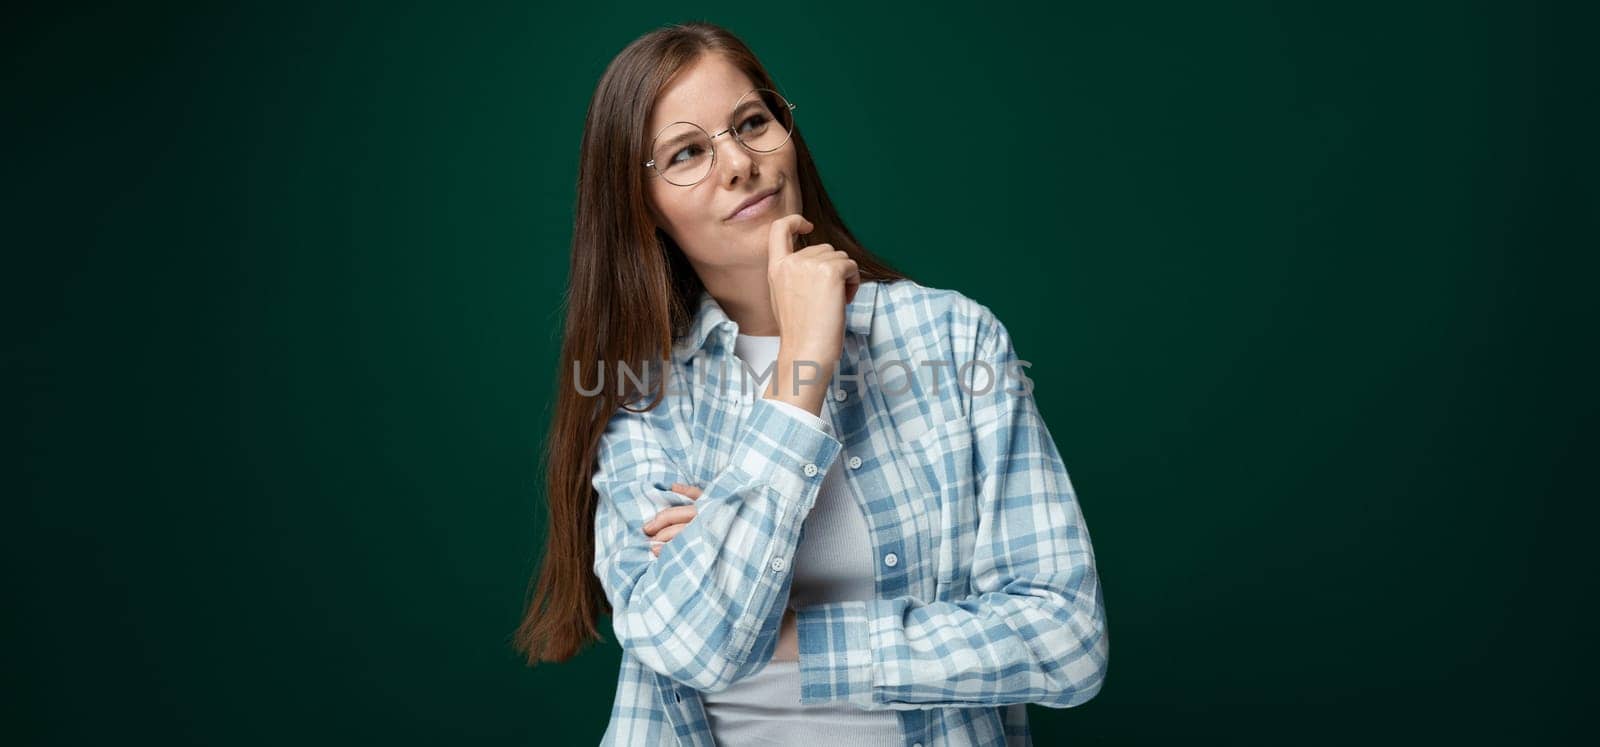 Charming young woman with brown hair thinking on a green background with copy space.